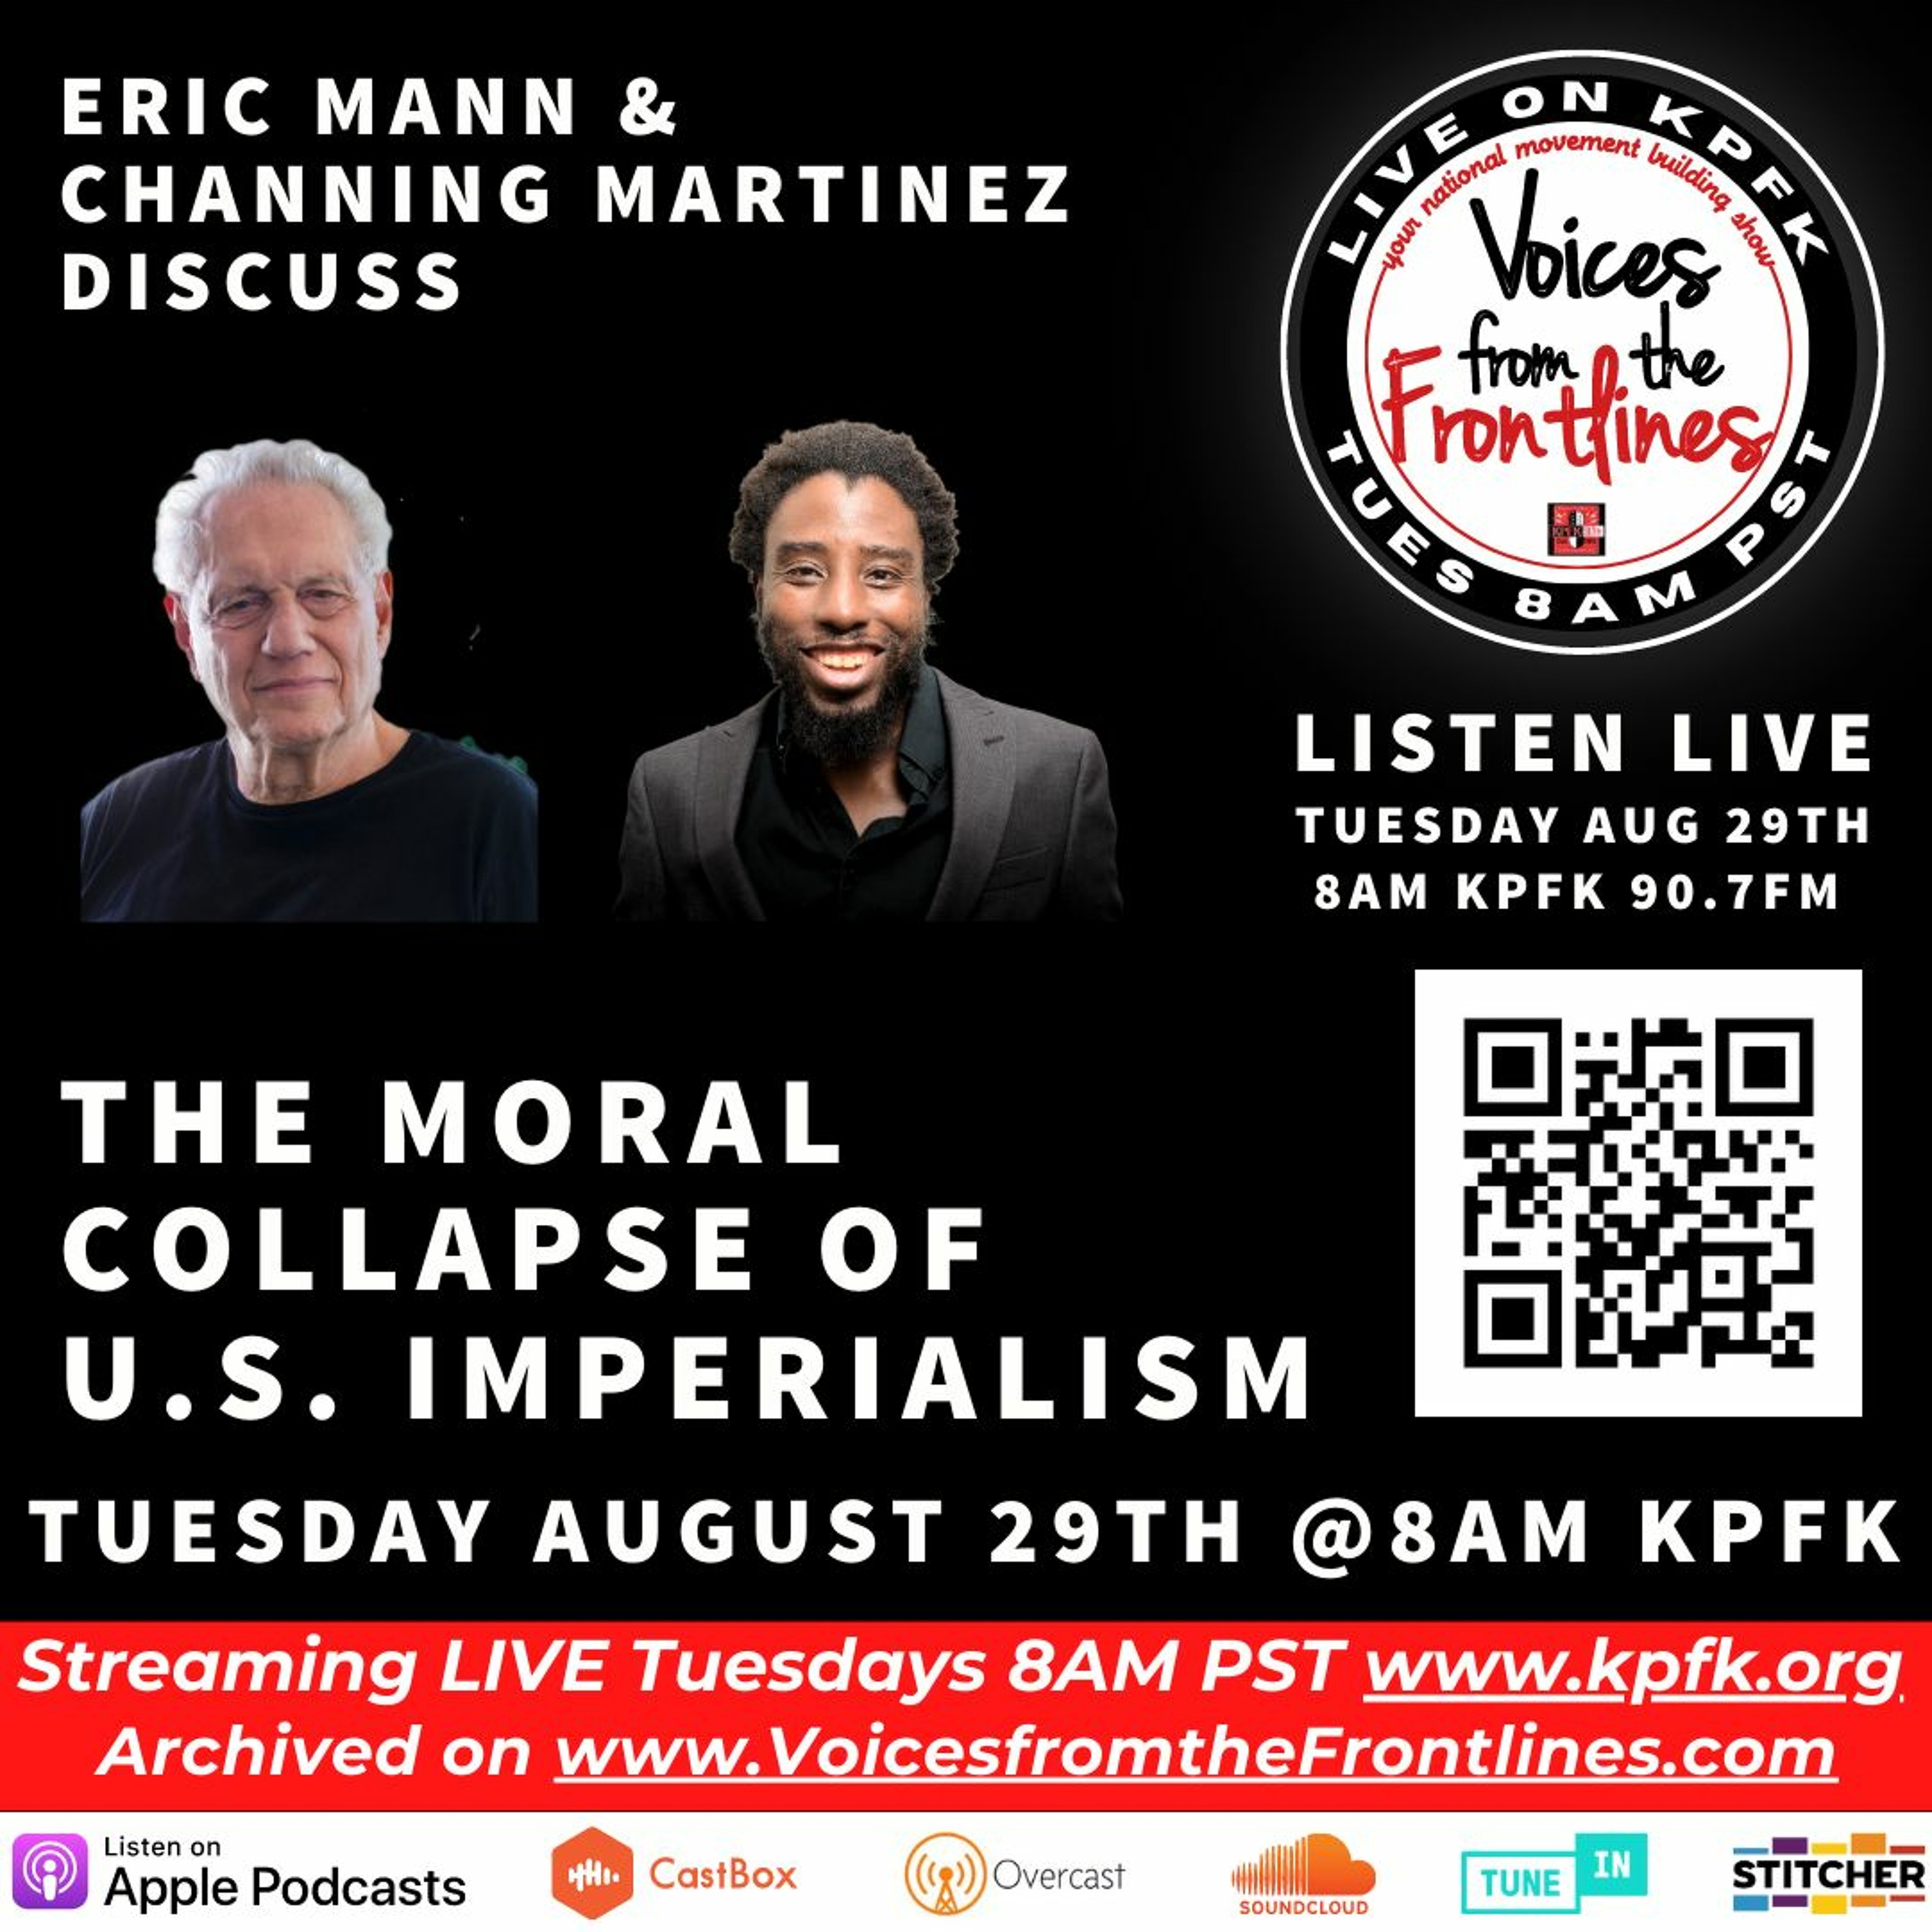 Eric Mann and Channing Martinez discuss the moral collapse of U.S. imperialism